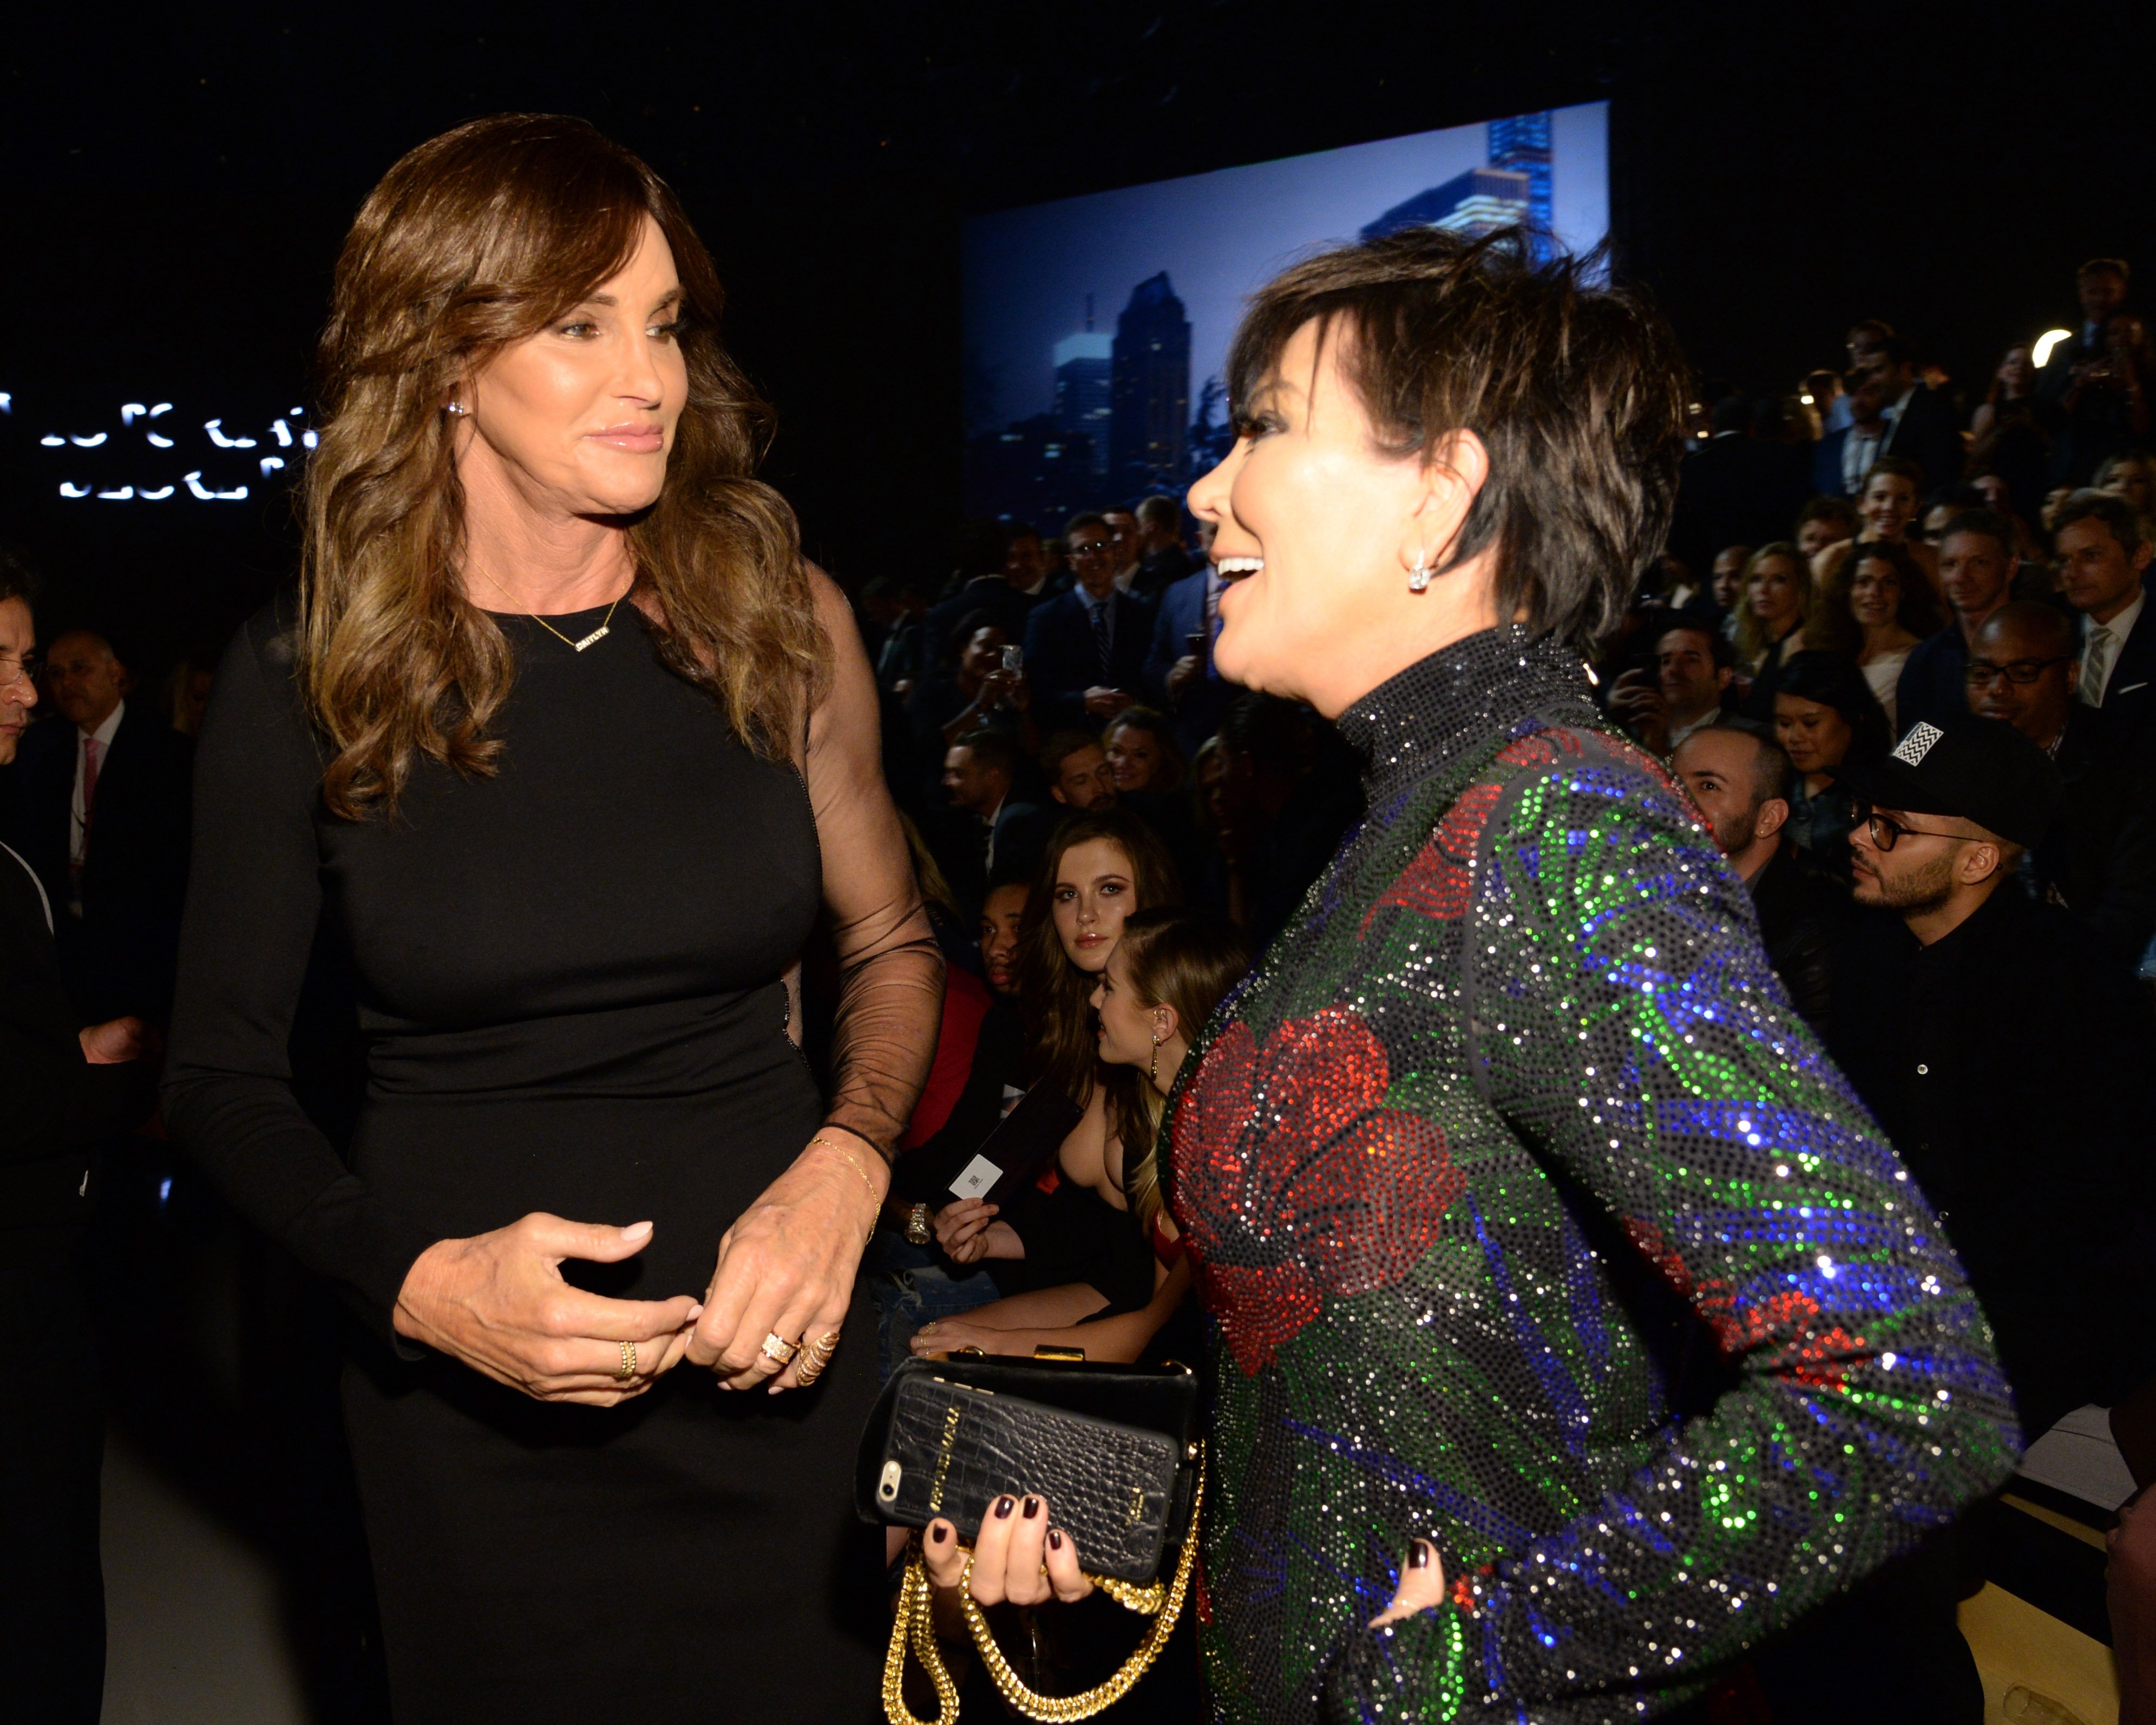 Caitlyn Jenner and Kris Jenner attend the 2015 Victoria's Secret Fashion Show at Lexington Armory on November 10, 2015 in New York City.